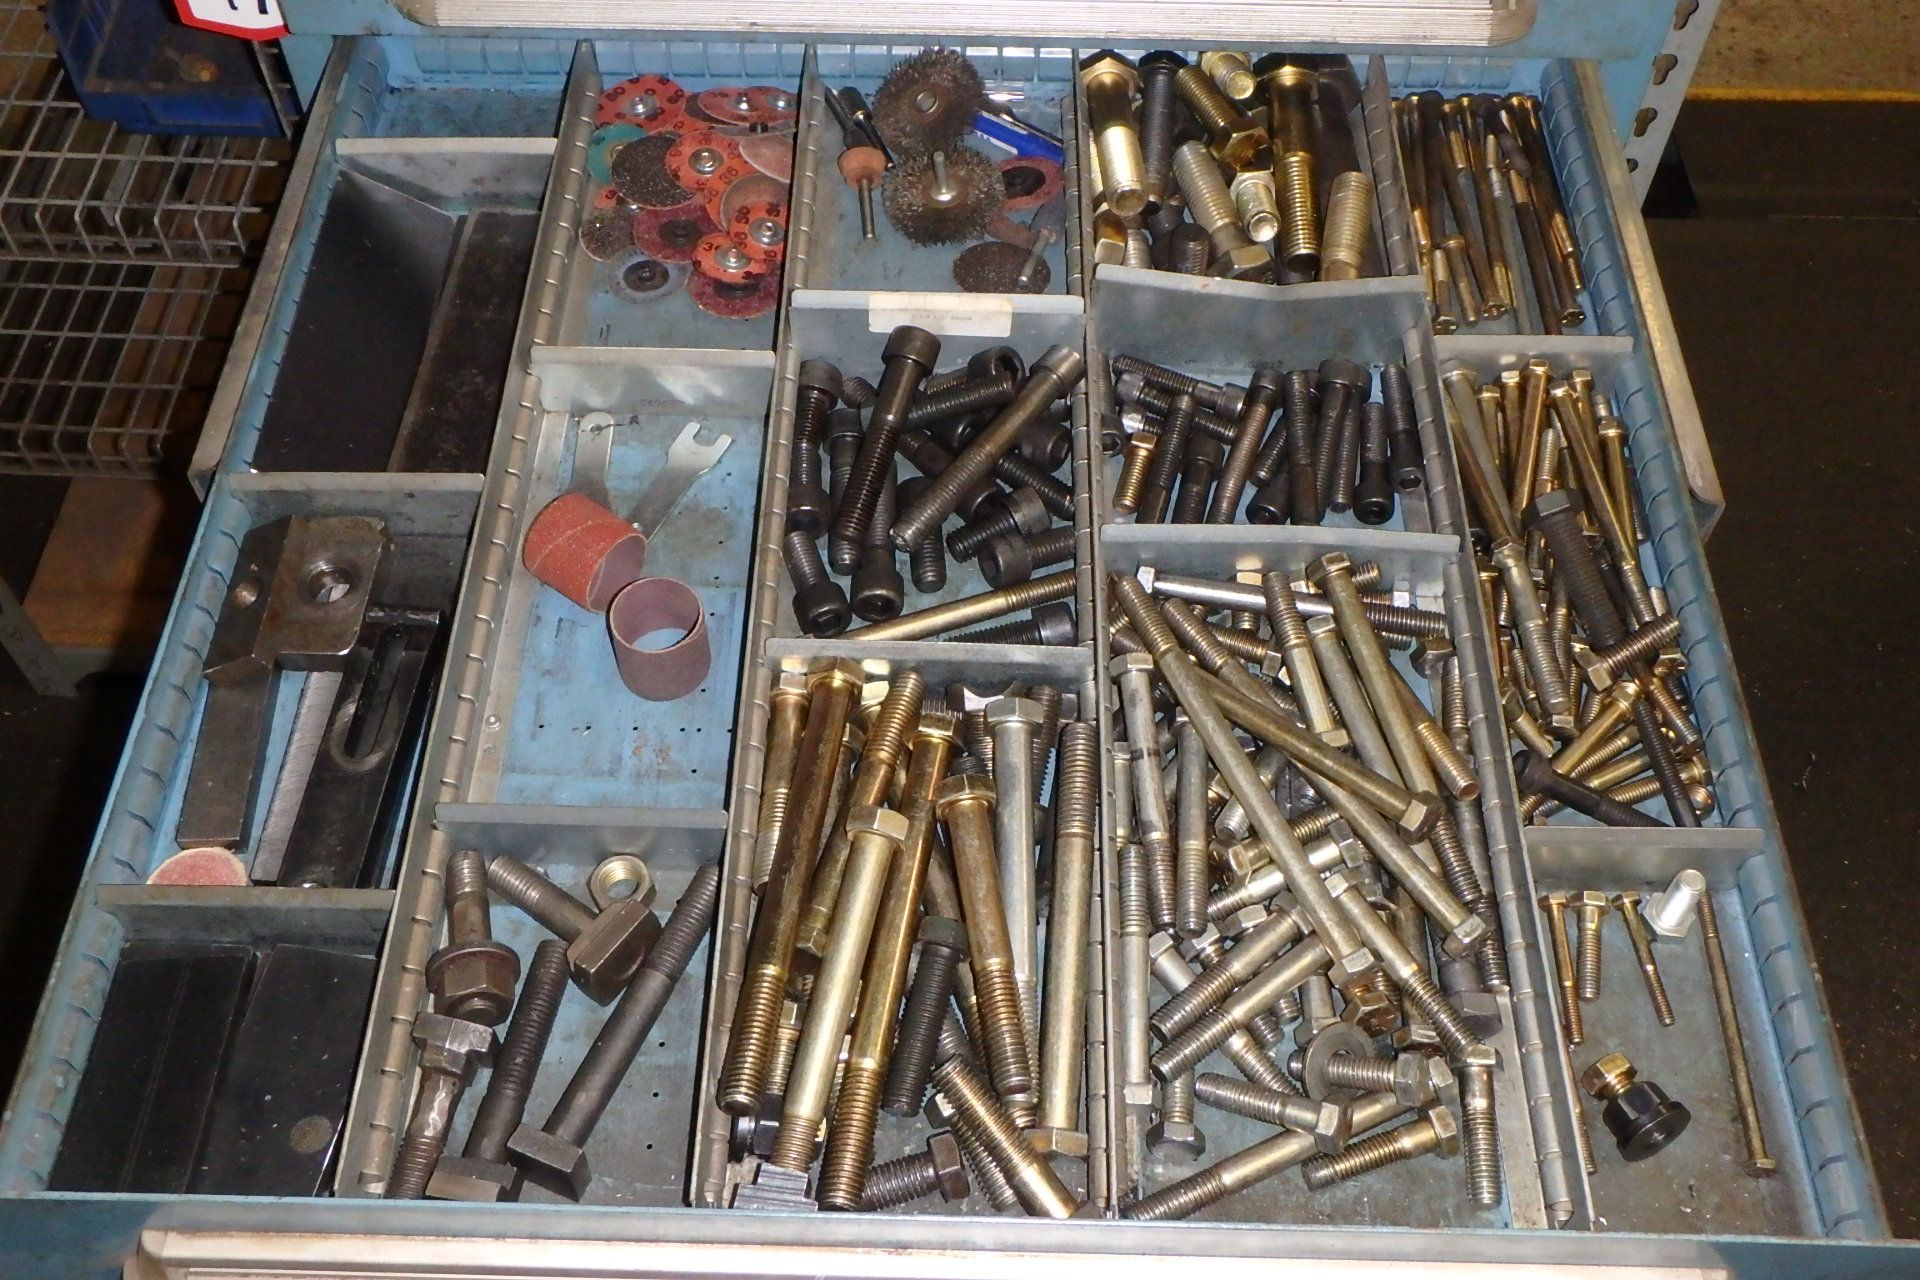 Lot Comprising Horizontal Cutters, Spacers, Tapers, (1) LYON 5-Drawer Cabinet, w/ Contents of Hold - Image 4 of 7